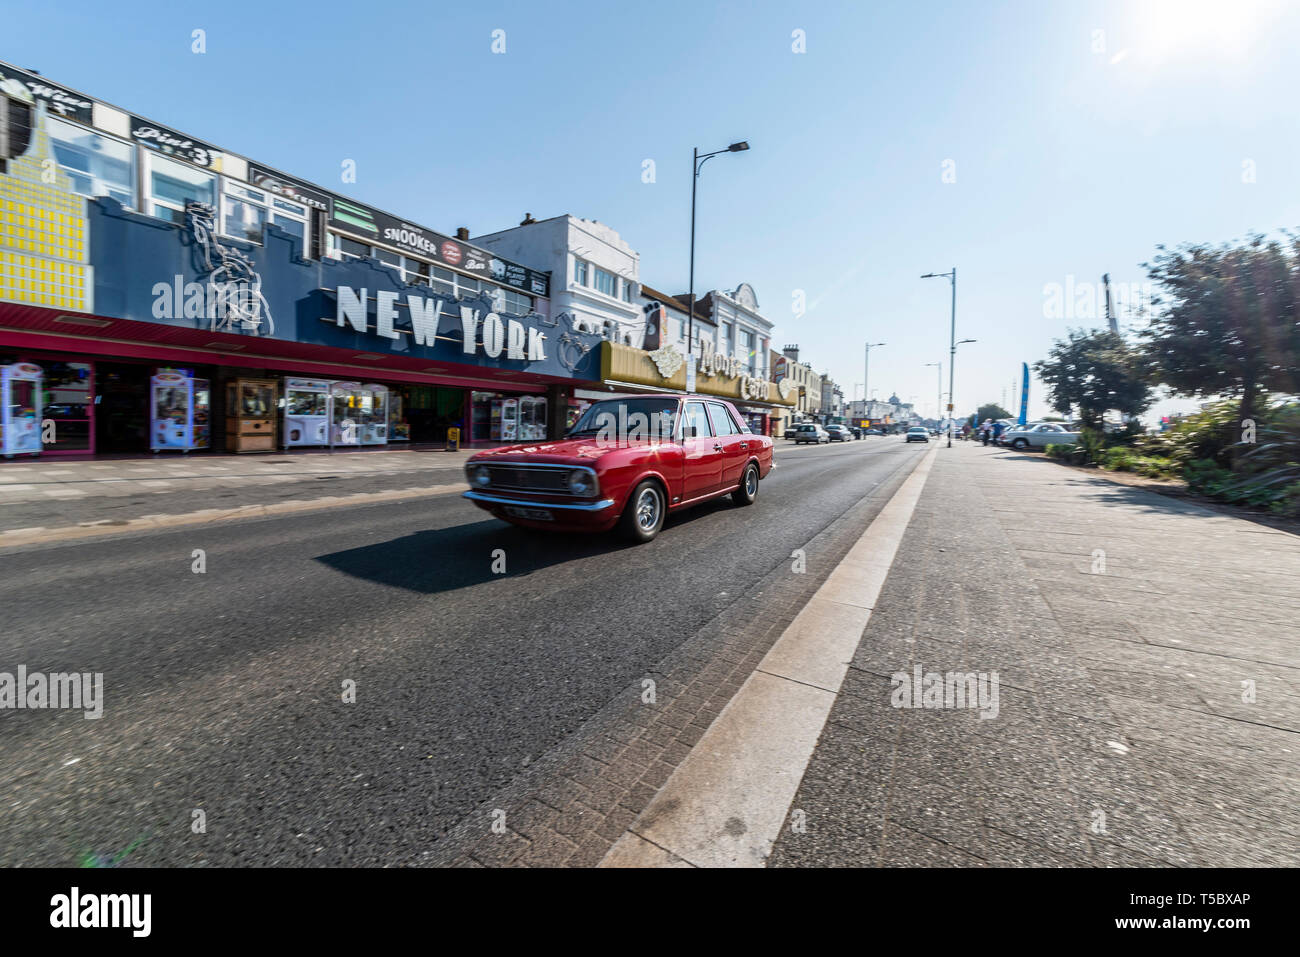 Ford Cortina II classic car at Southend on Sea, Essex, seafront on a sunny day. Driving along Marine Parade passing New York arcade Stock Photo